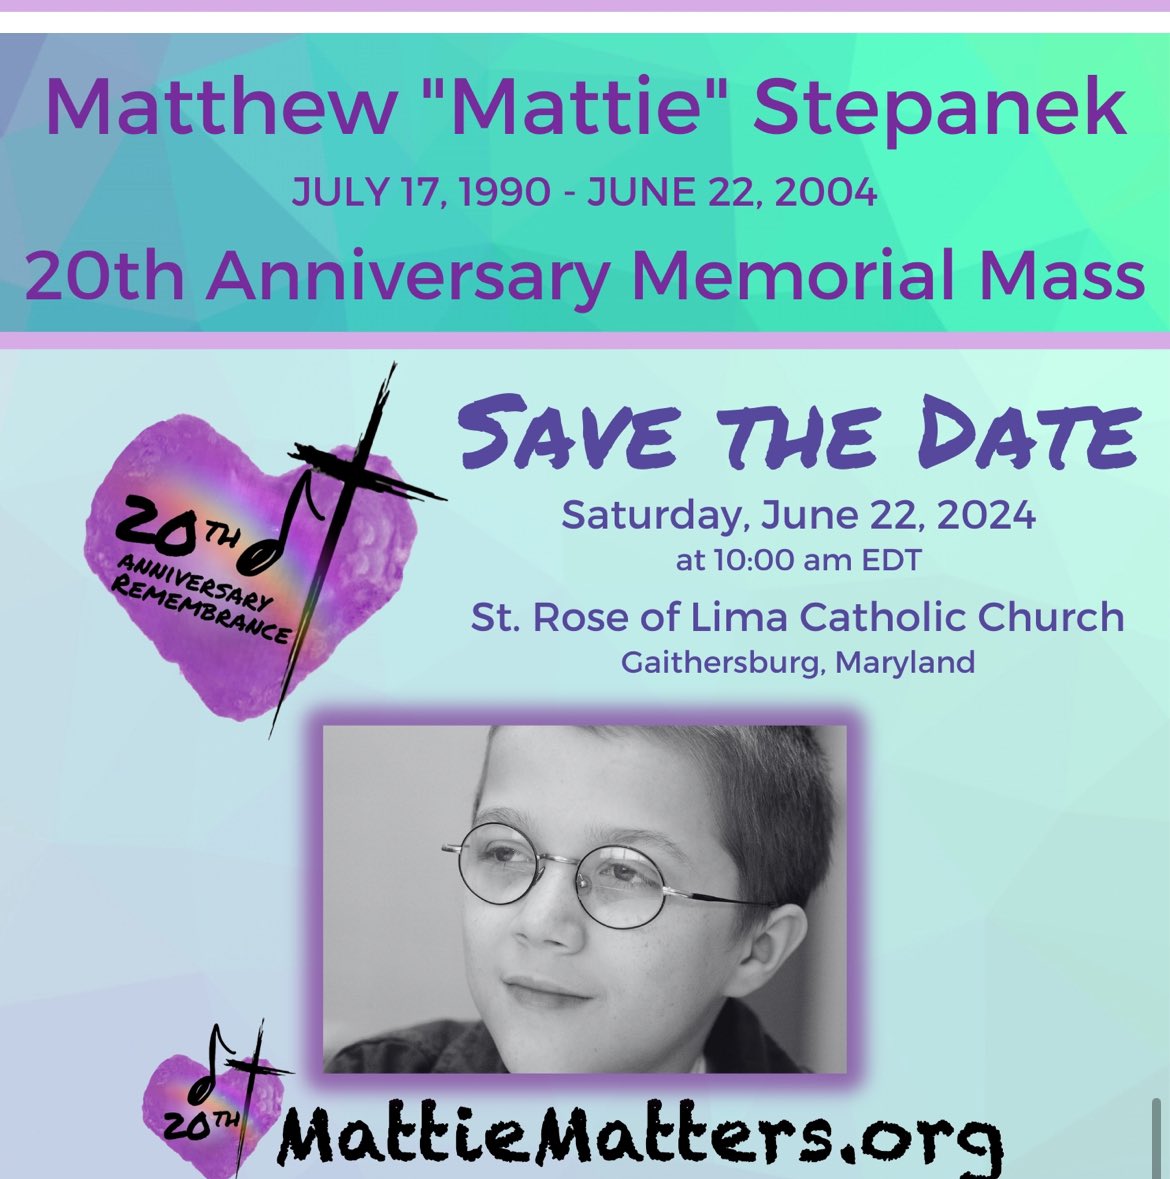 Come and pray with us as we rejoice in the life and legacy of #MattieStepanek!

#MattieMatters #MattiesCause #MattiesGuild